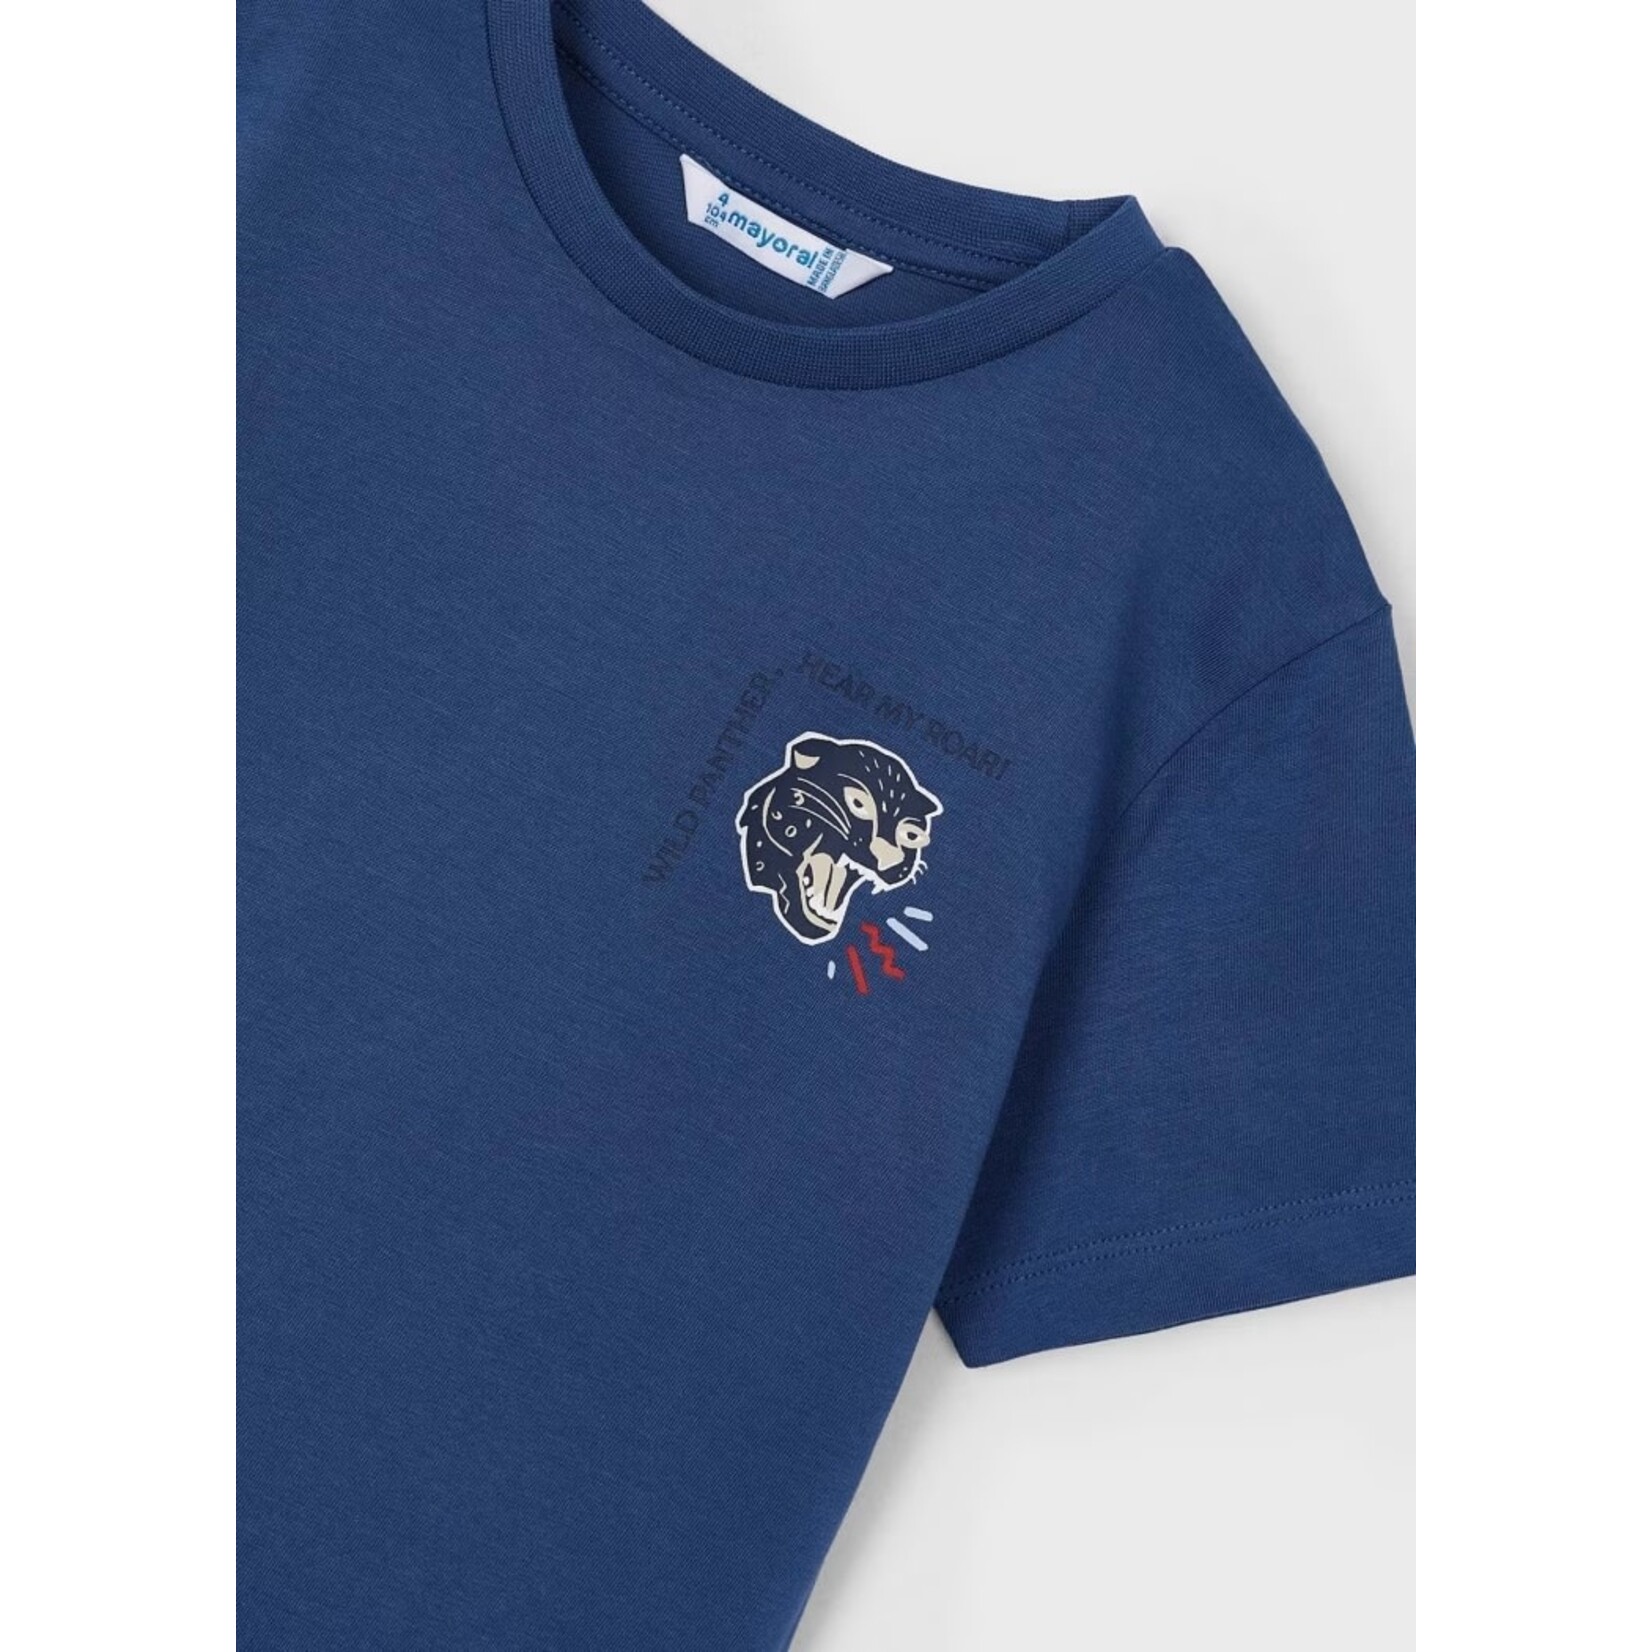 Mayoral MAYORAL - Blue Short Sleeve T-Shirt with Panther Print 'Wild Panther, Hear my Roar'